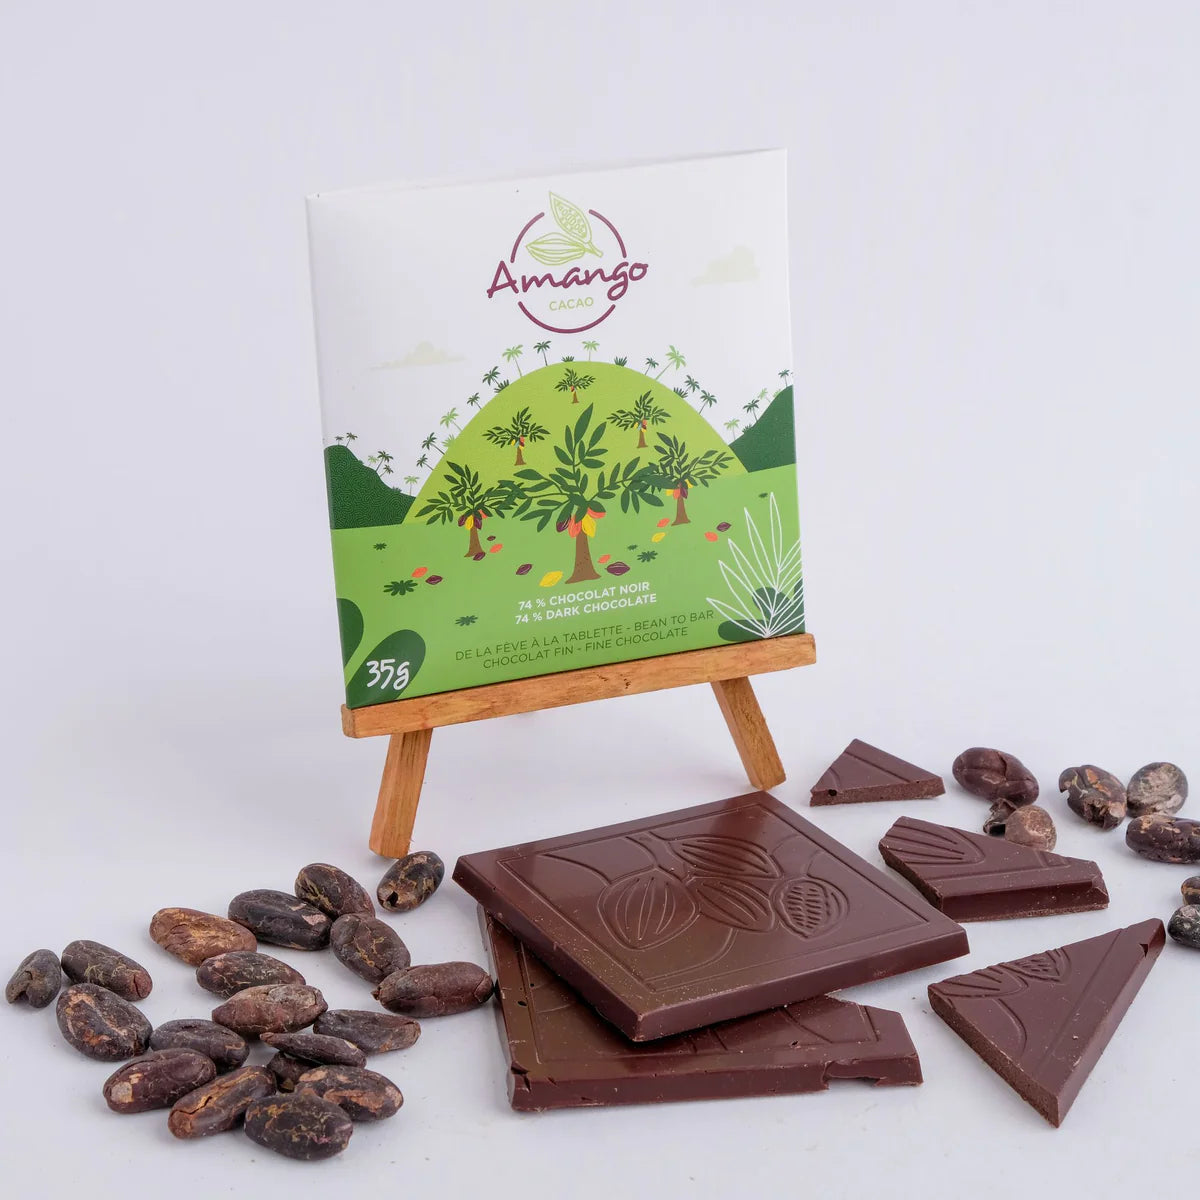 74% Dark Chocolate with Cocoa by Amango, 35g